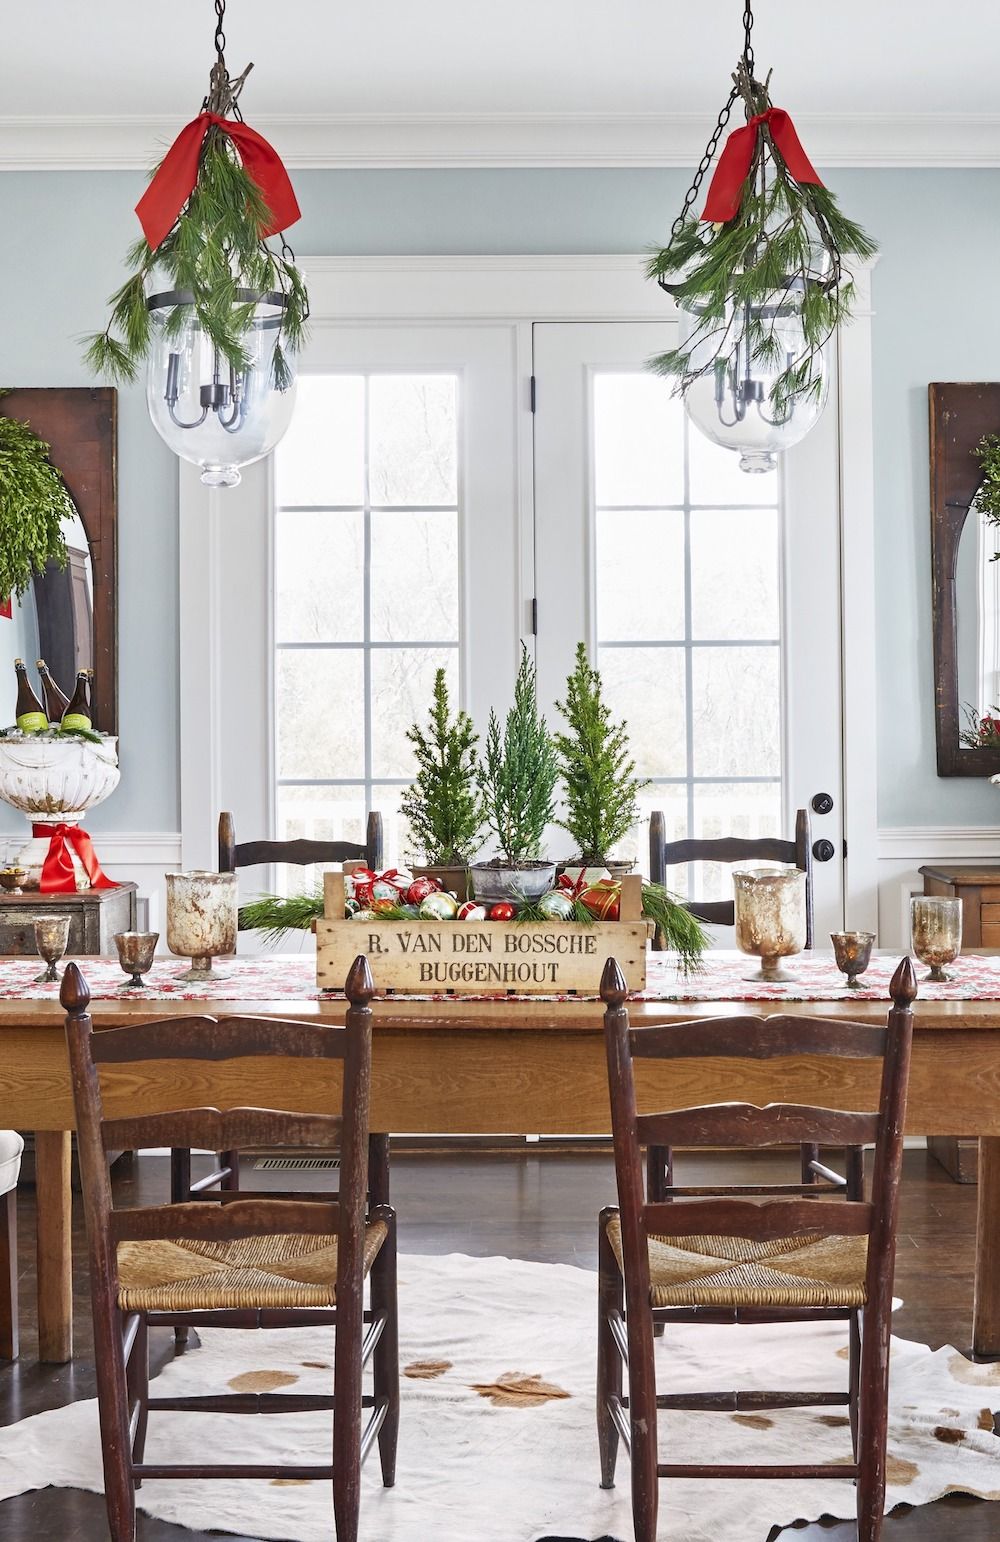 25 Best DIY Christmas Centerpiece Ideas - Easy Holiday Centerpieces You Can Make Yourself